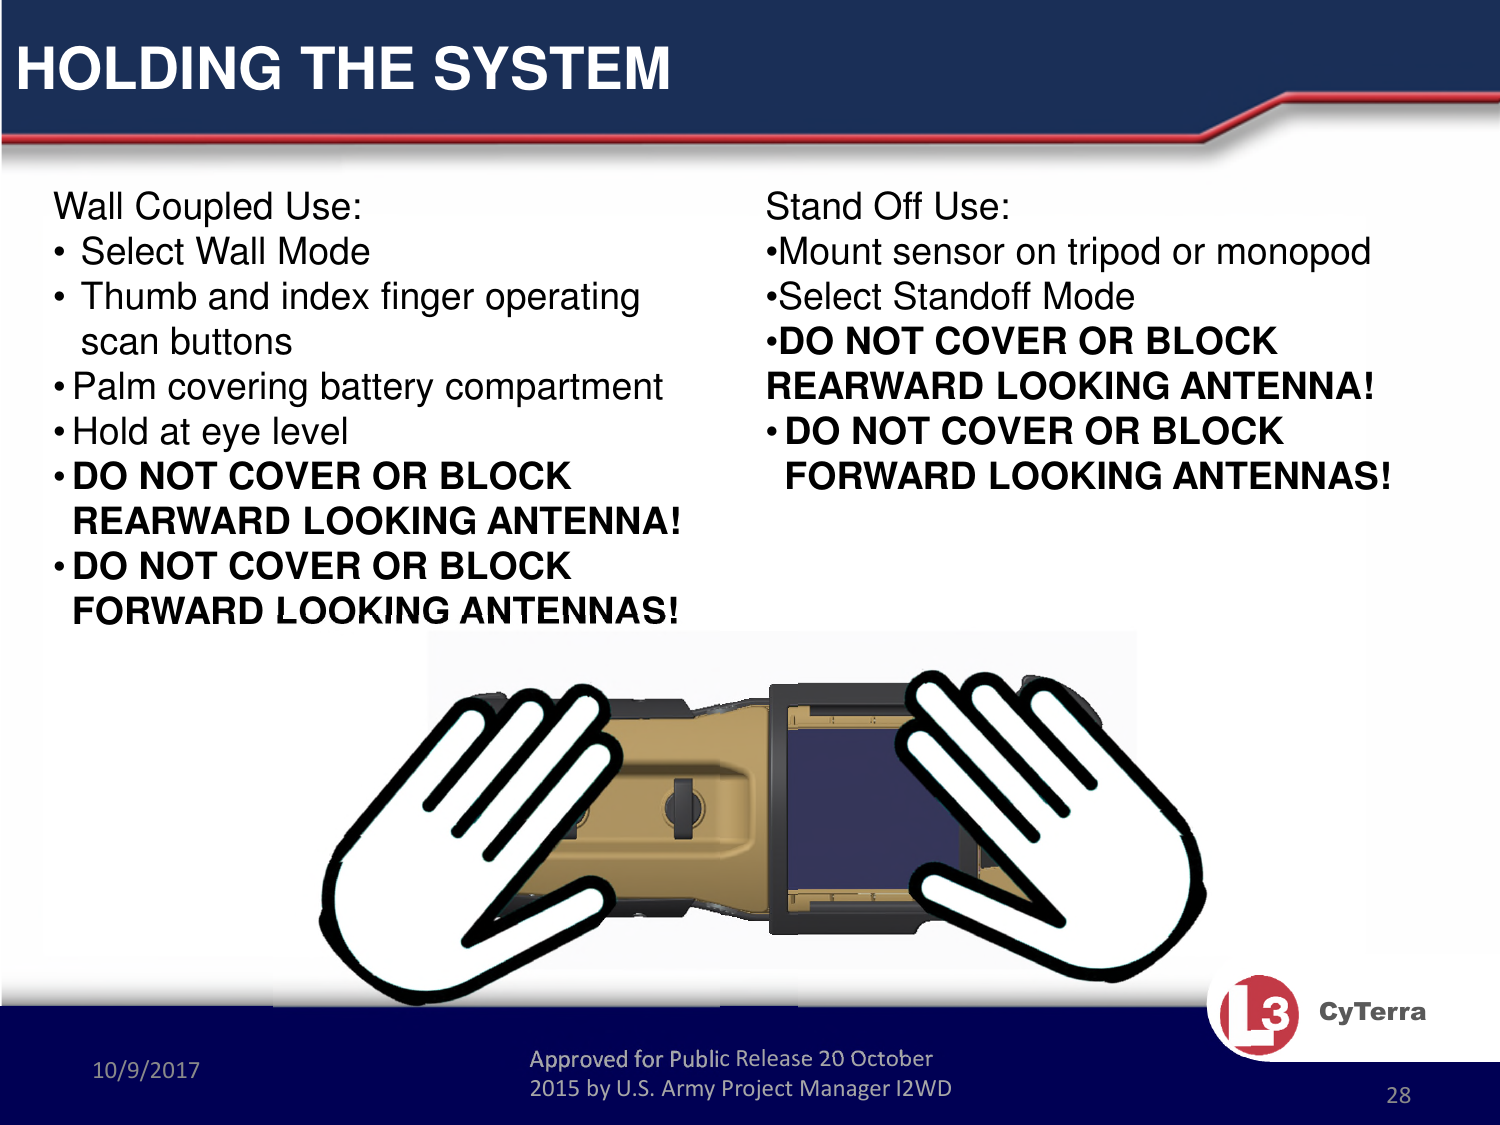 Approved for Public Release 20 October 2015 by U.S. Army Project Manager I2WD10/9/2017 Approved for Public Release 20 October 2015 by U.S. Army Project Manager I2WD 28CyTerraHOLDING THE SYSTEMWall Coupled Use: • Select Wall Mode• Thumb and index finger operating scan buttons• Palm covering battery compartment• Hold at eye level•DO NOT COVER OR BLOCK REARWARD LOOKING ANTENNA!•DO NOT COVER OR BLOCK FORWARD LOOKING ANTENNAS!Stand Off Use:•Mount sensor on tripod or monopod•Select Standoff Mode•DO NOT COVER OR BLOCK REARWARD LOOKING ANTENNA!•DO NOT COVER OR BLOCK FORWARD LOOKING ANTENNAS!